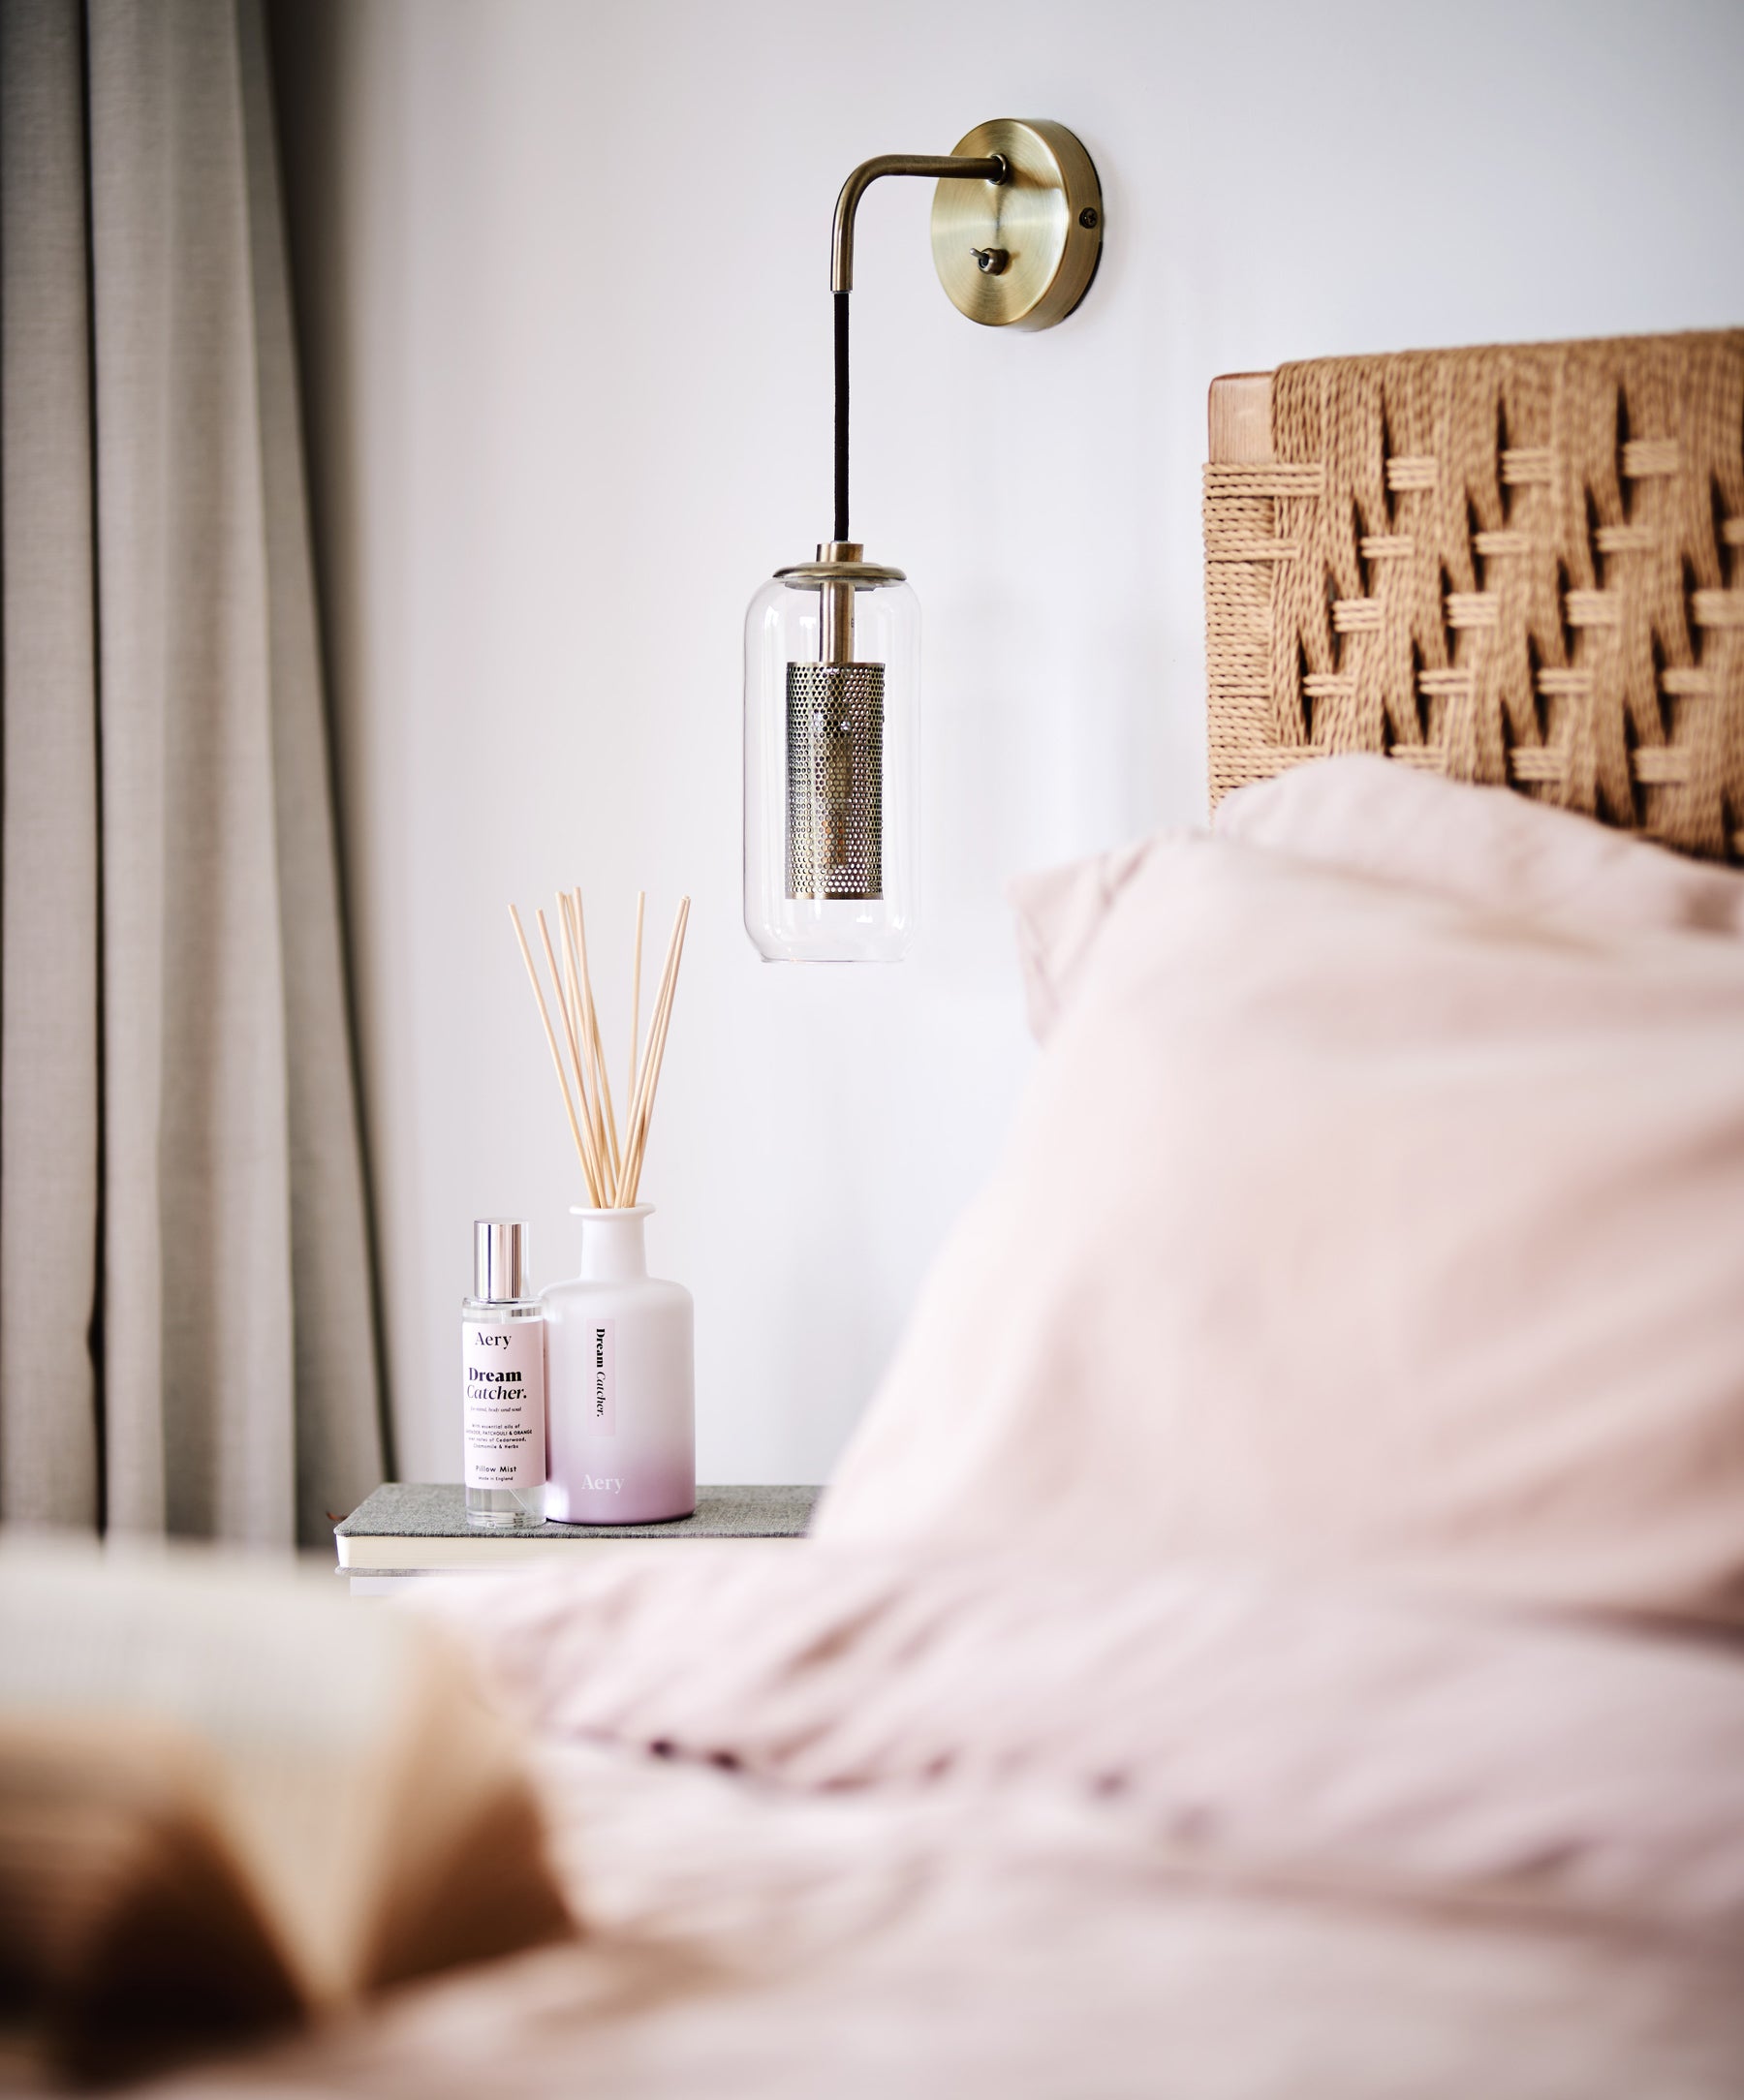 beside table setting, with open book and dusty pink bedding. Aery living reed diffuser and pillow mist displayed on table